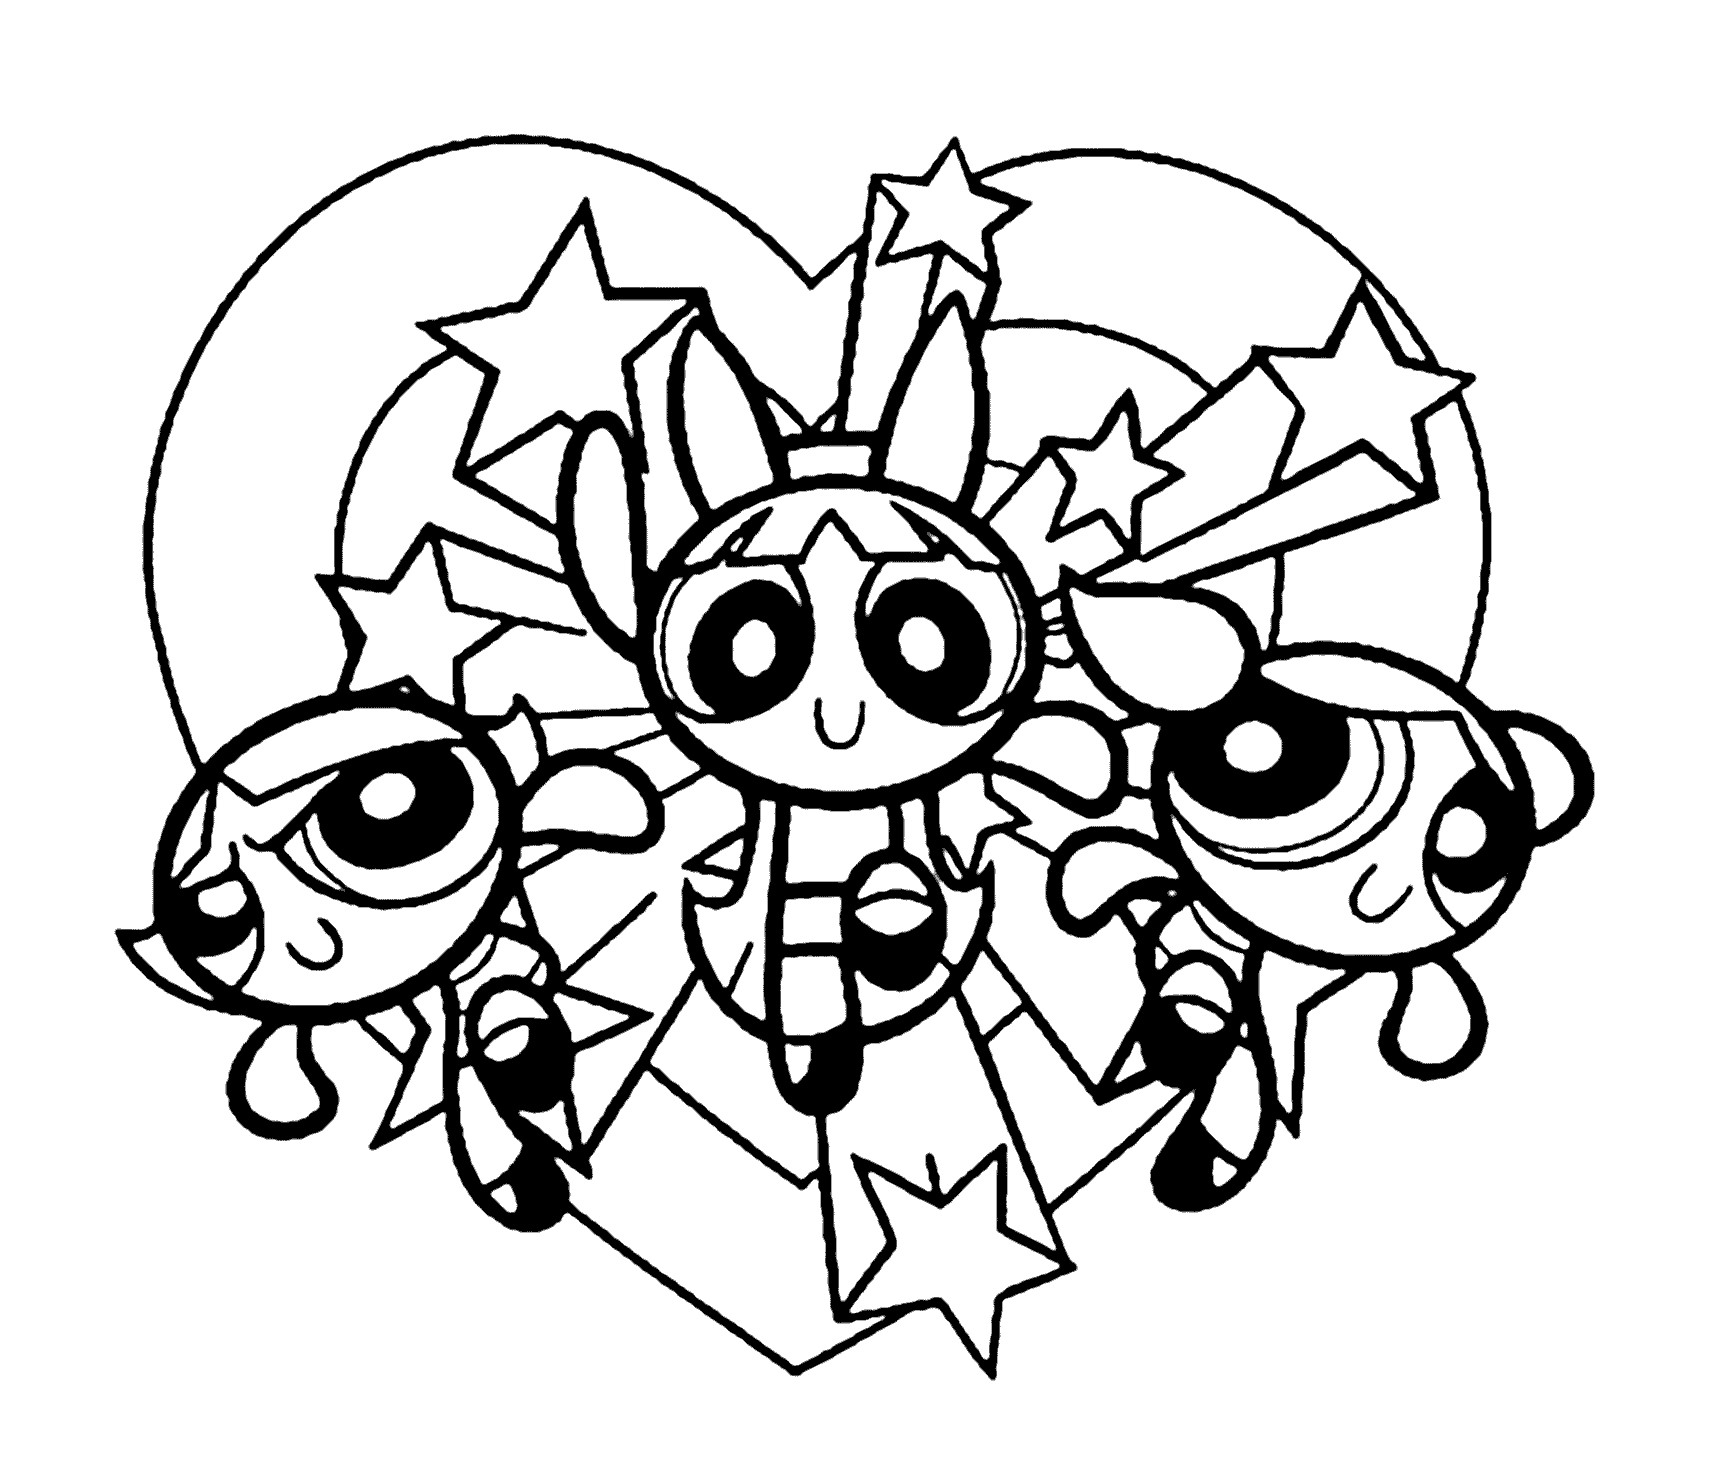 Powder Puff Girls Coloring Pages
 12 printable pictures of powerpuff girls page Print